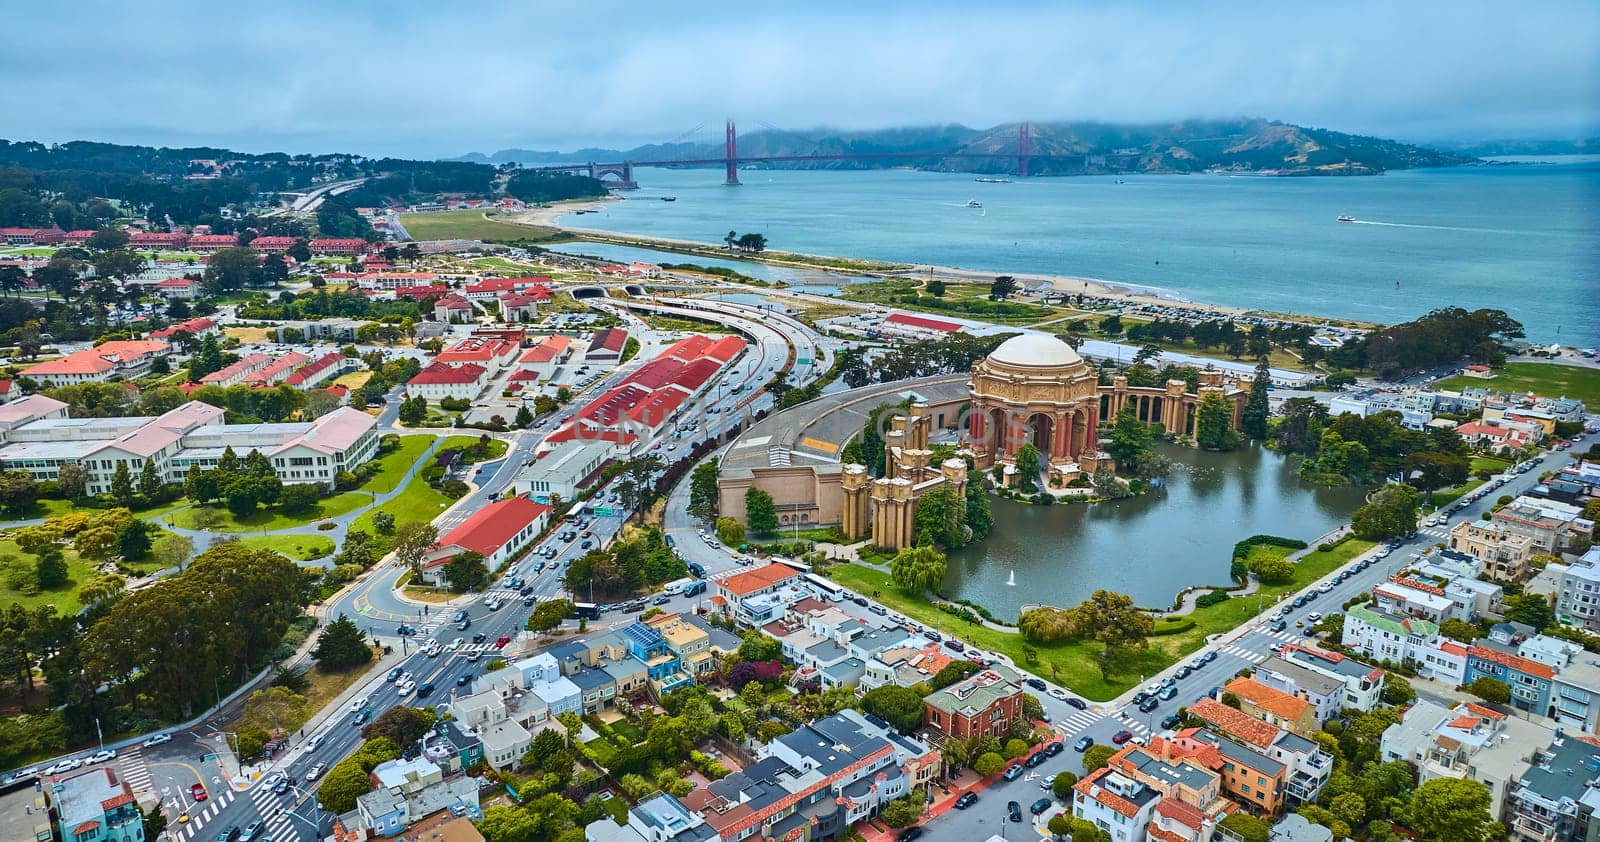 Image of Palace of Fine Arts rotunda and colonnade around pond with Golden Gate Bridge in distance aerial